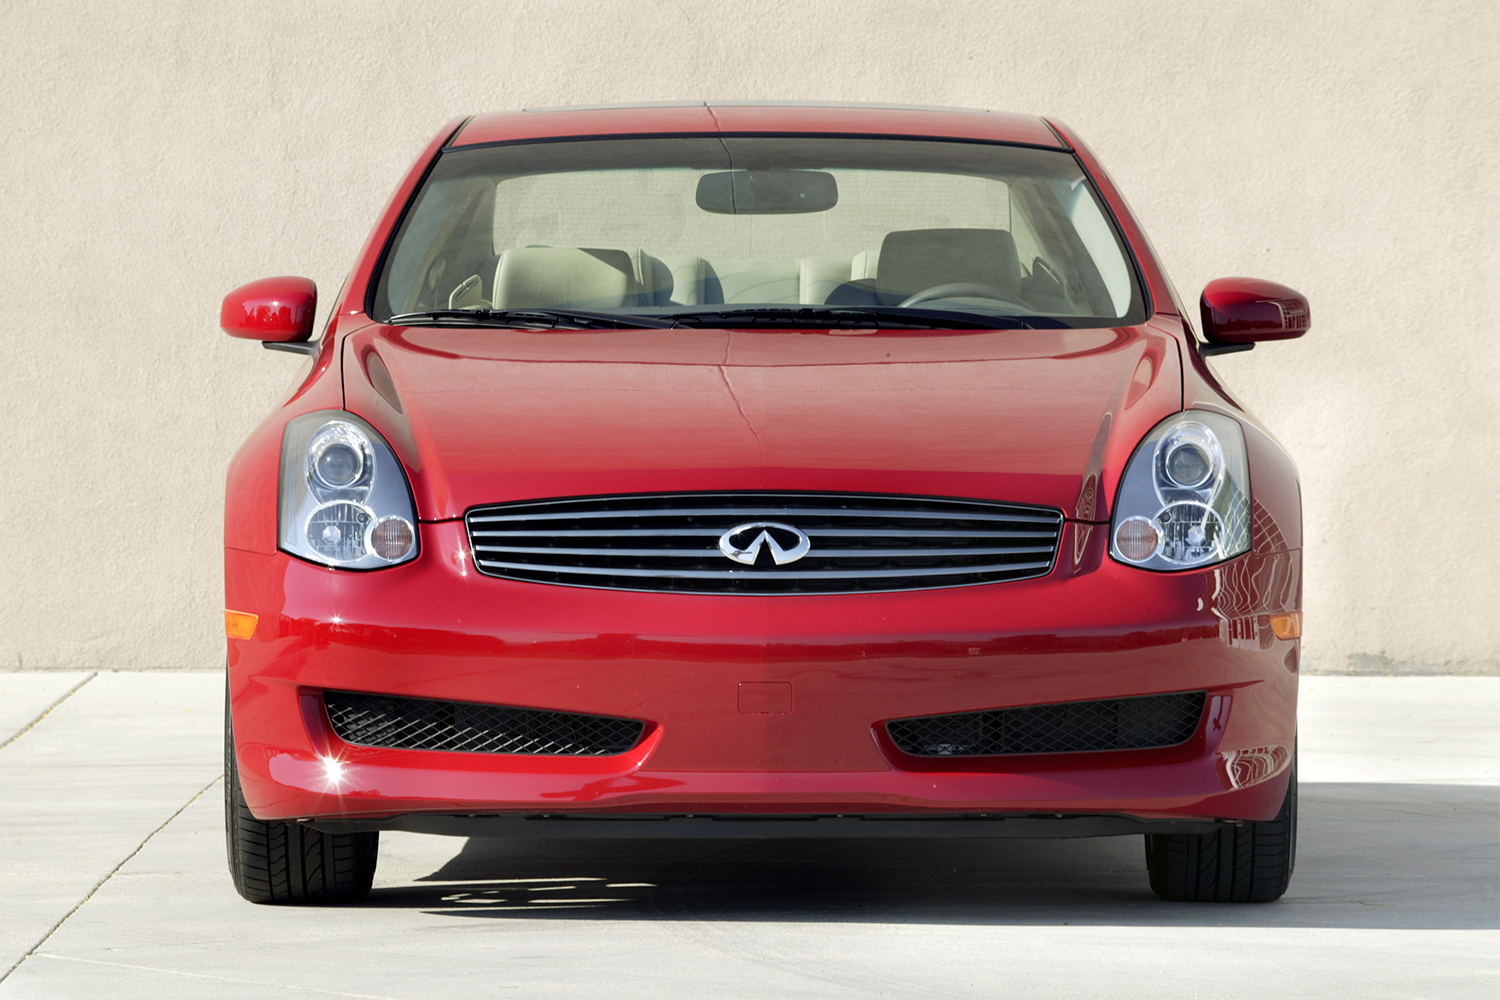 A red 2006 Infiniti G35 Coupe